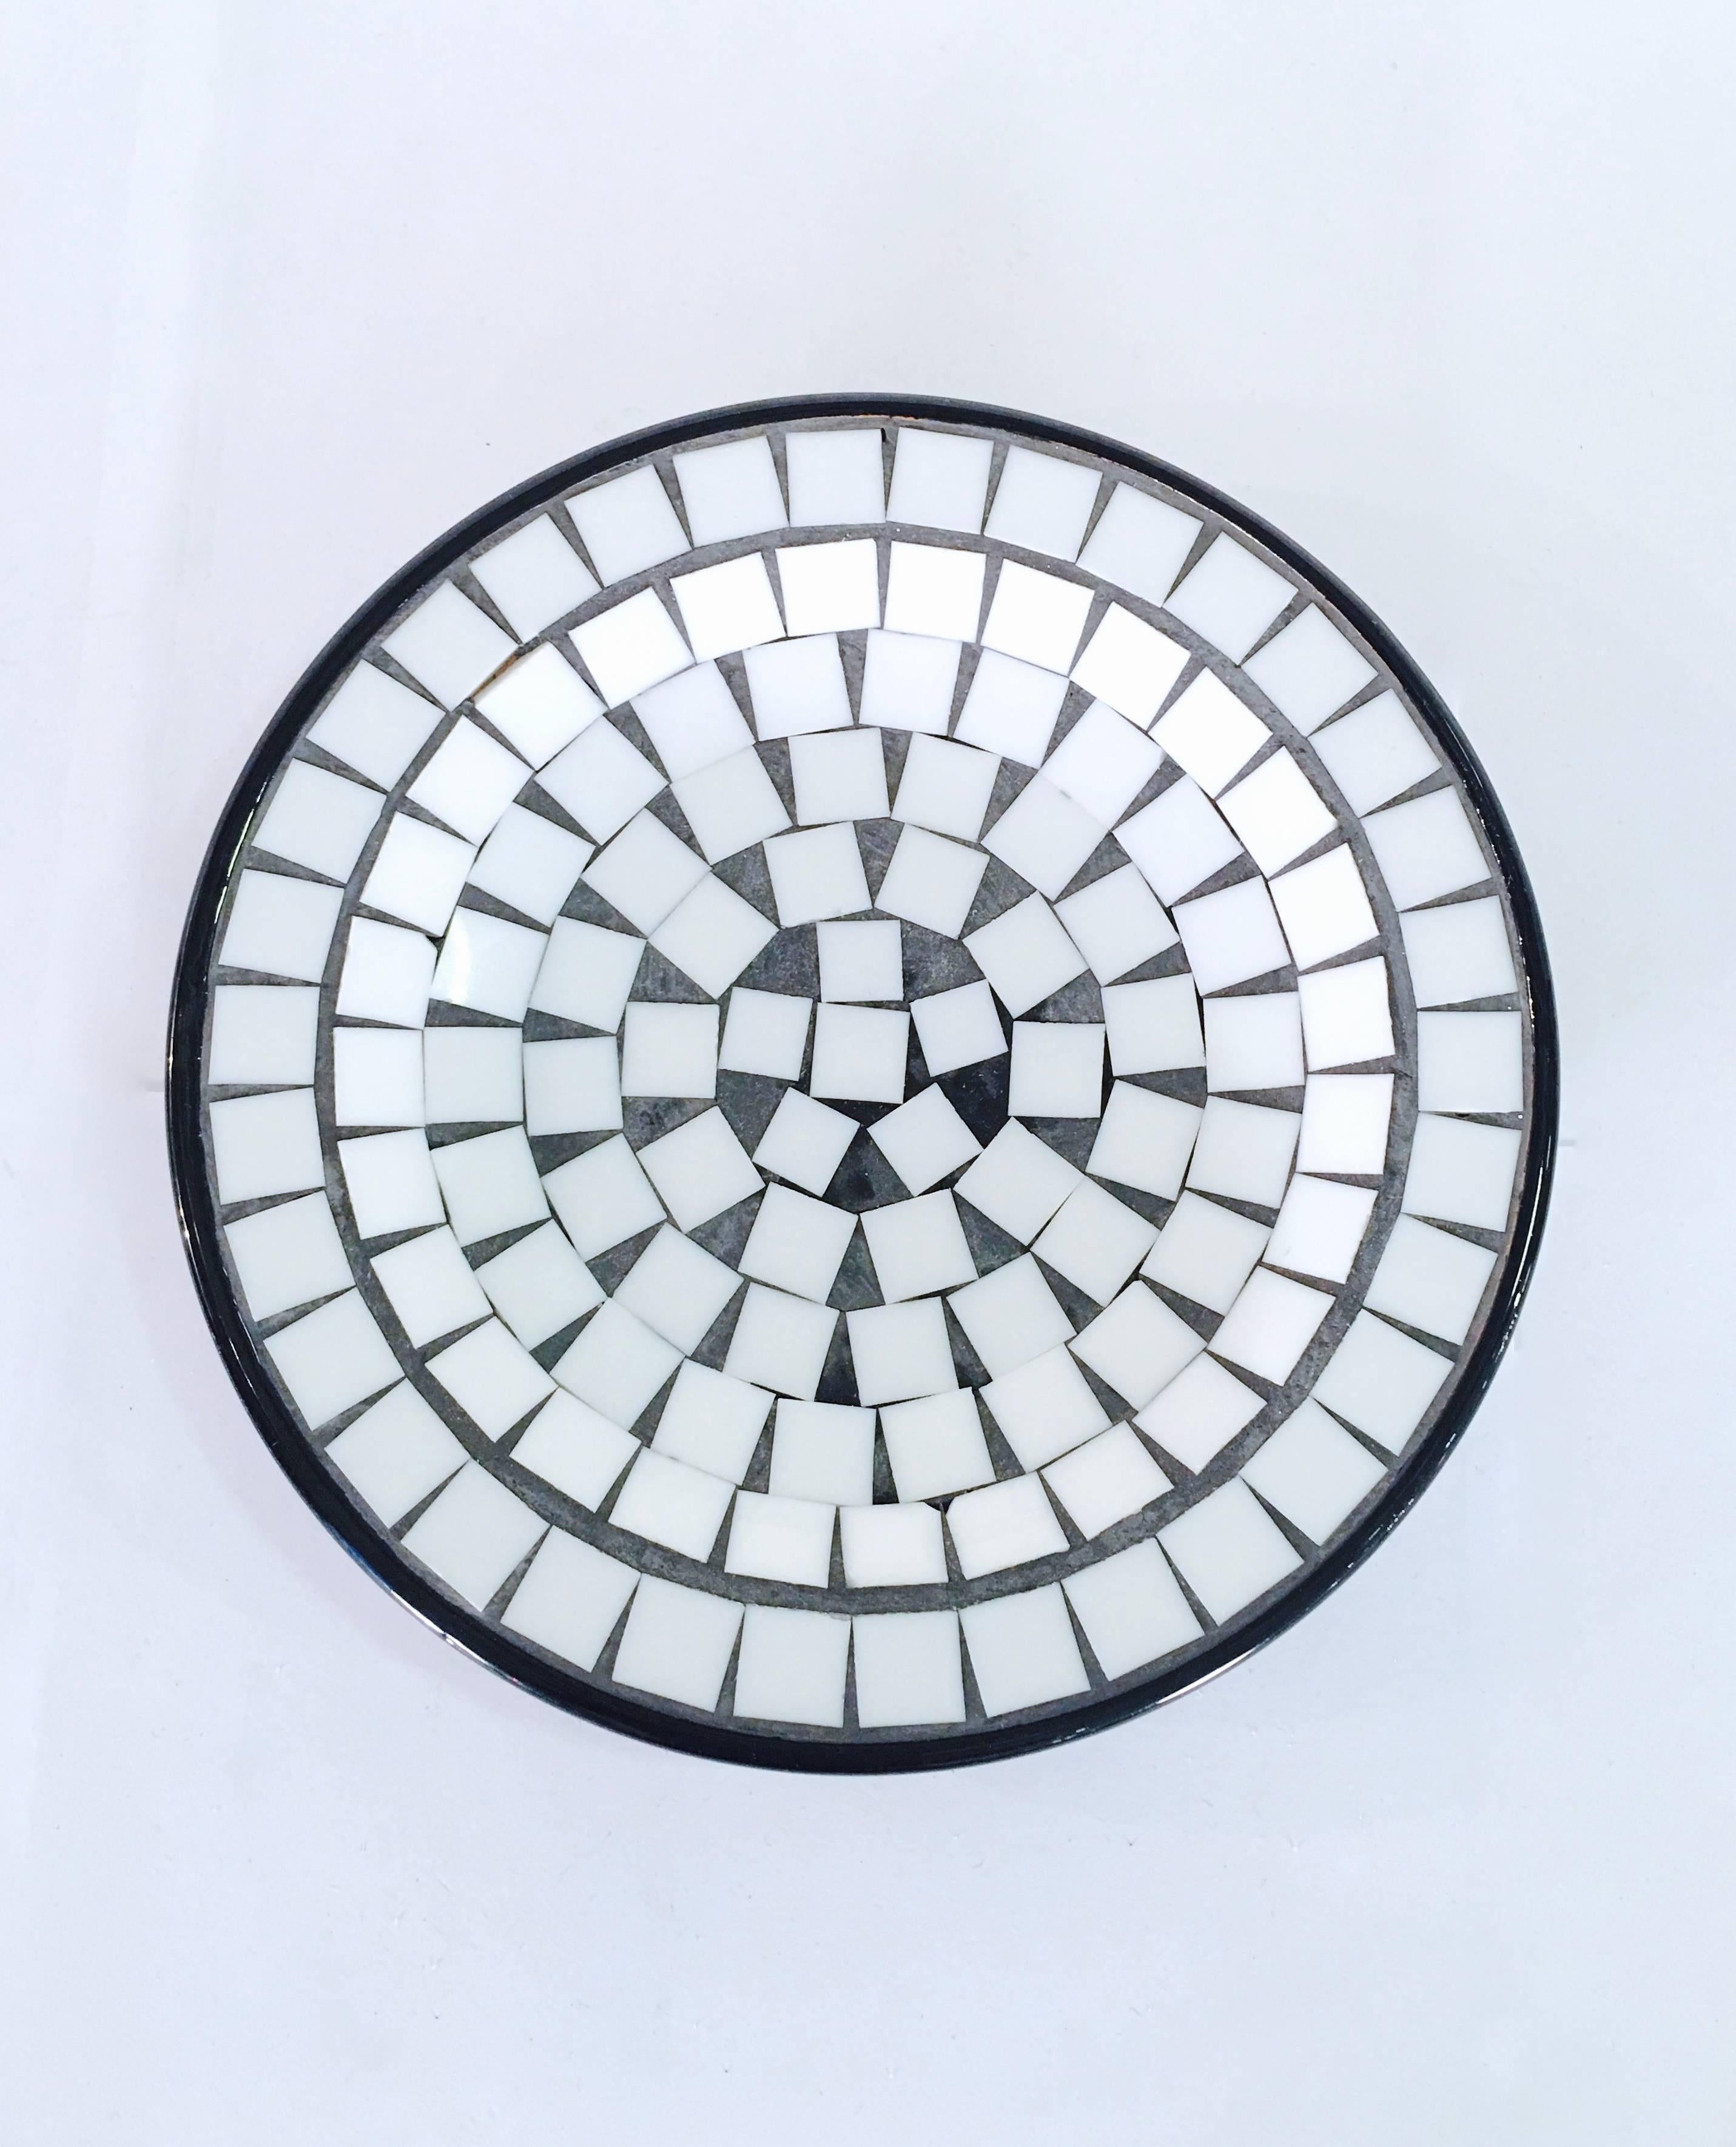 Nicely done decorative pottery plate with an inlay of white tiles. The piece is finished in a black glaze. Please contact for location. Offered by Las Venus by Kenneth Clark, New York City.